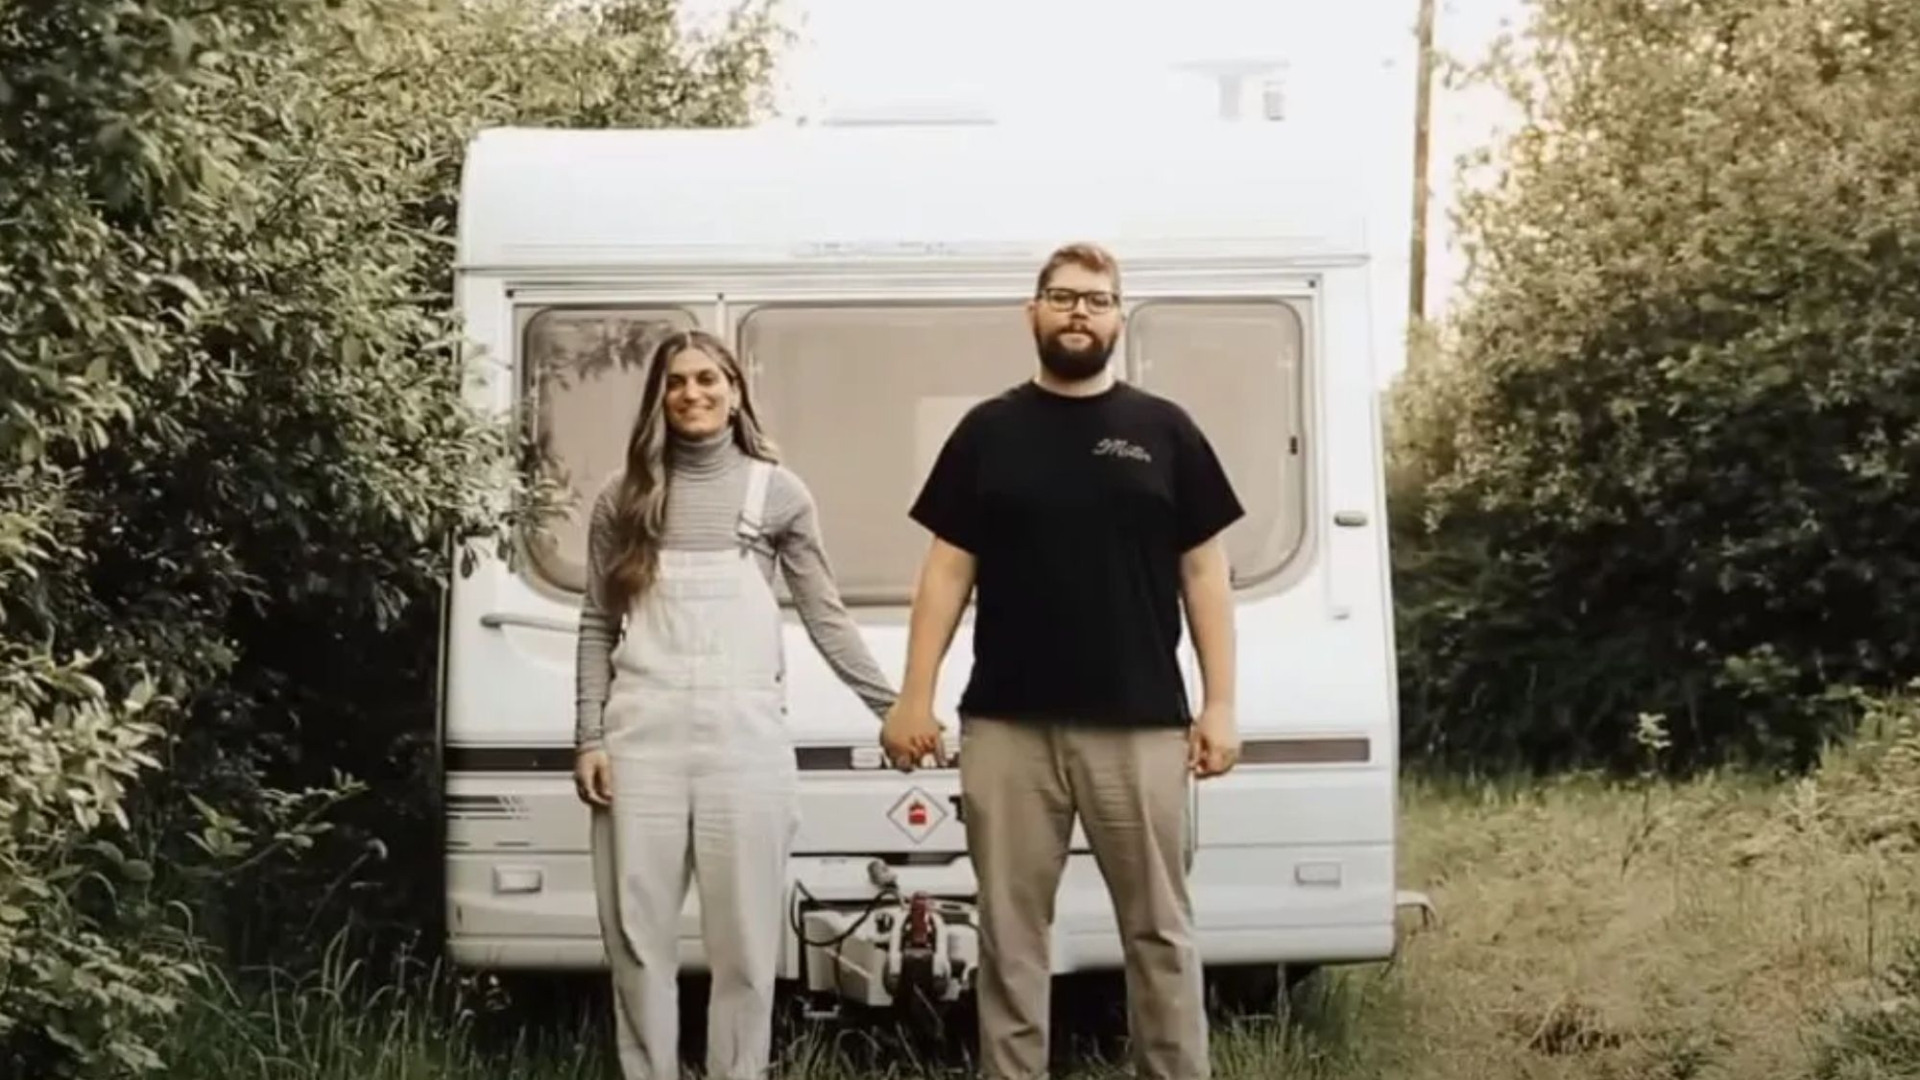 We sold out home and bought a mouldy caravan – we transformed it for £400 and live in it full time, it looks SO posh